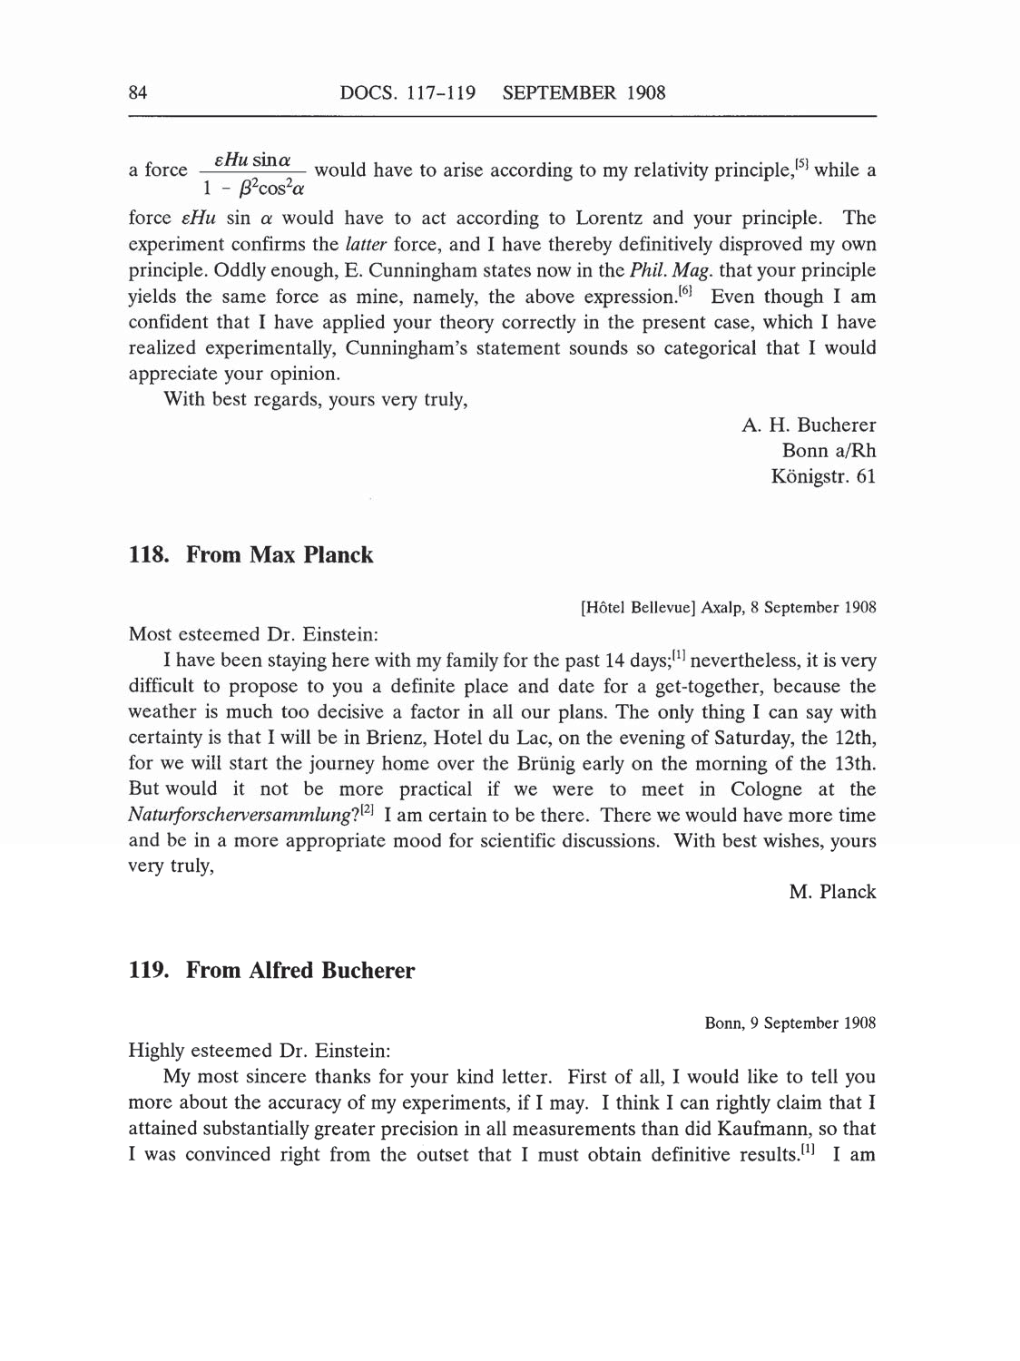 Volume 5: The Swiss Years: Correspondence, 1902-1914 (English translation supplement) page 84